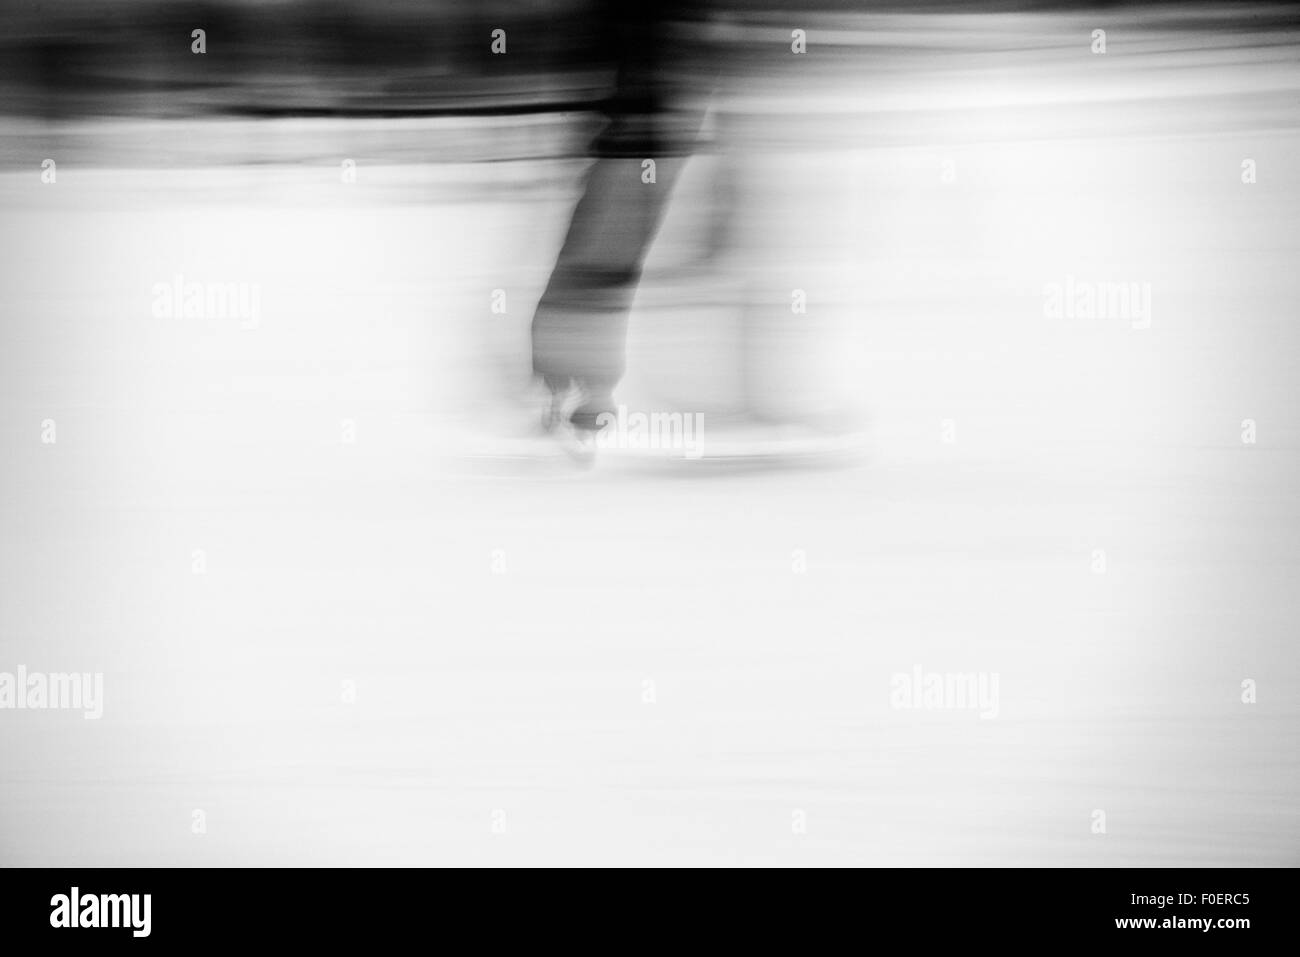 Man ice skating in park. Motion blur showing speed and movement. Stock Photo